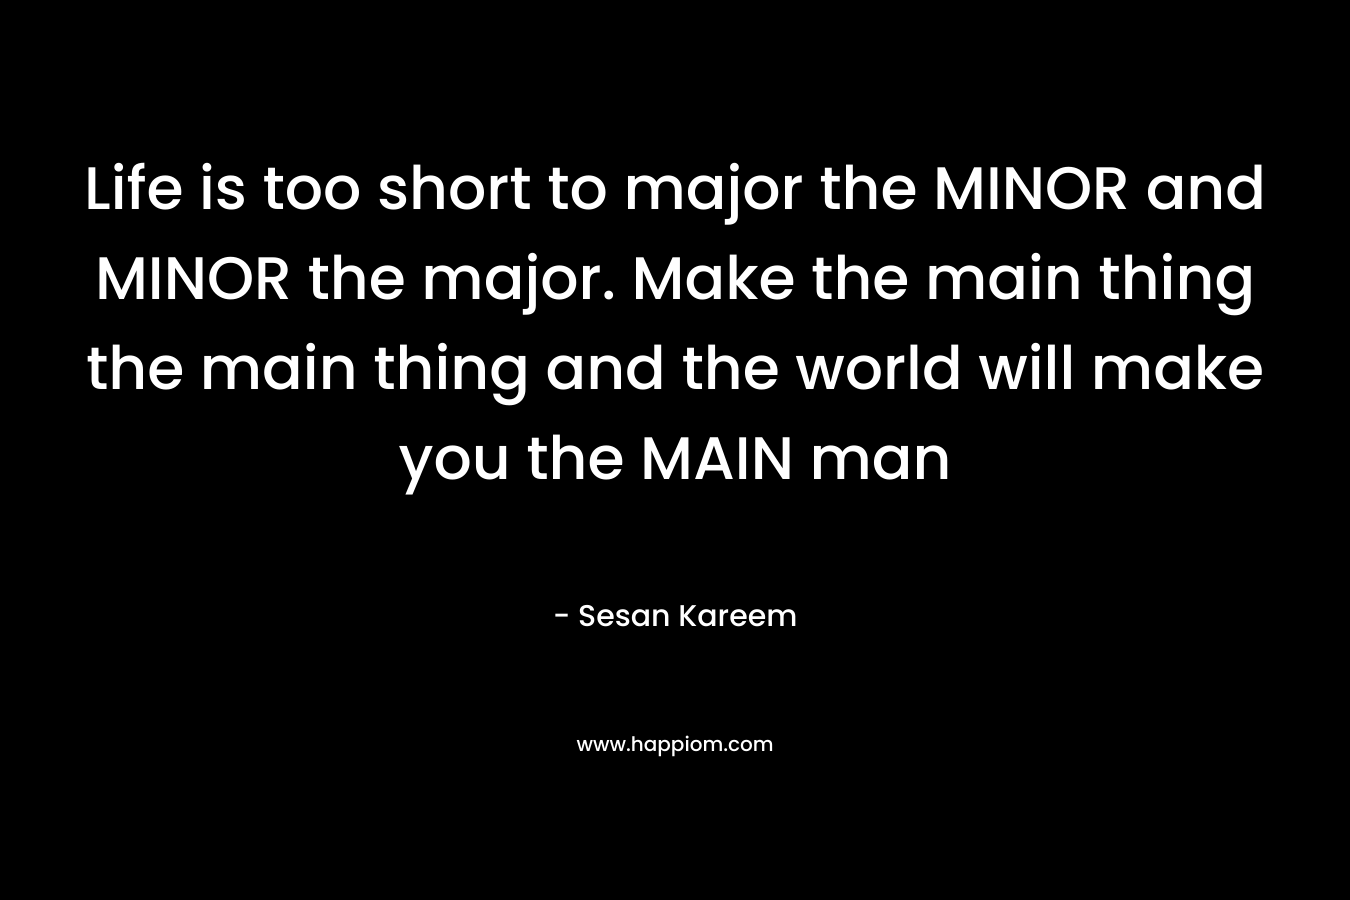 Life is too short to major the MINOR and MINOR the major. Make the main thing the main thing and the world will make you the MAIN man